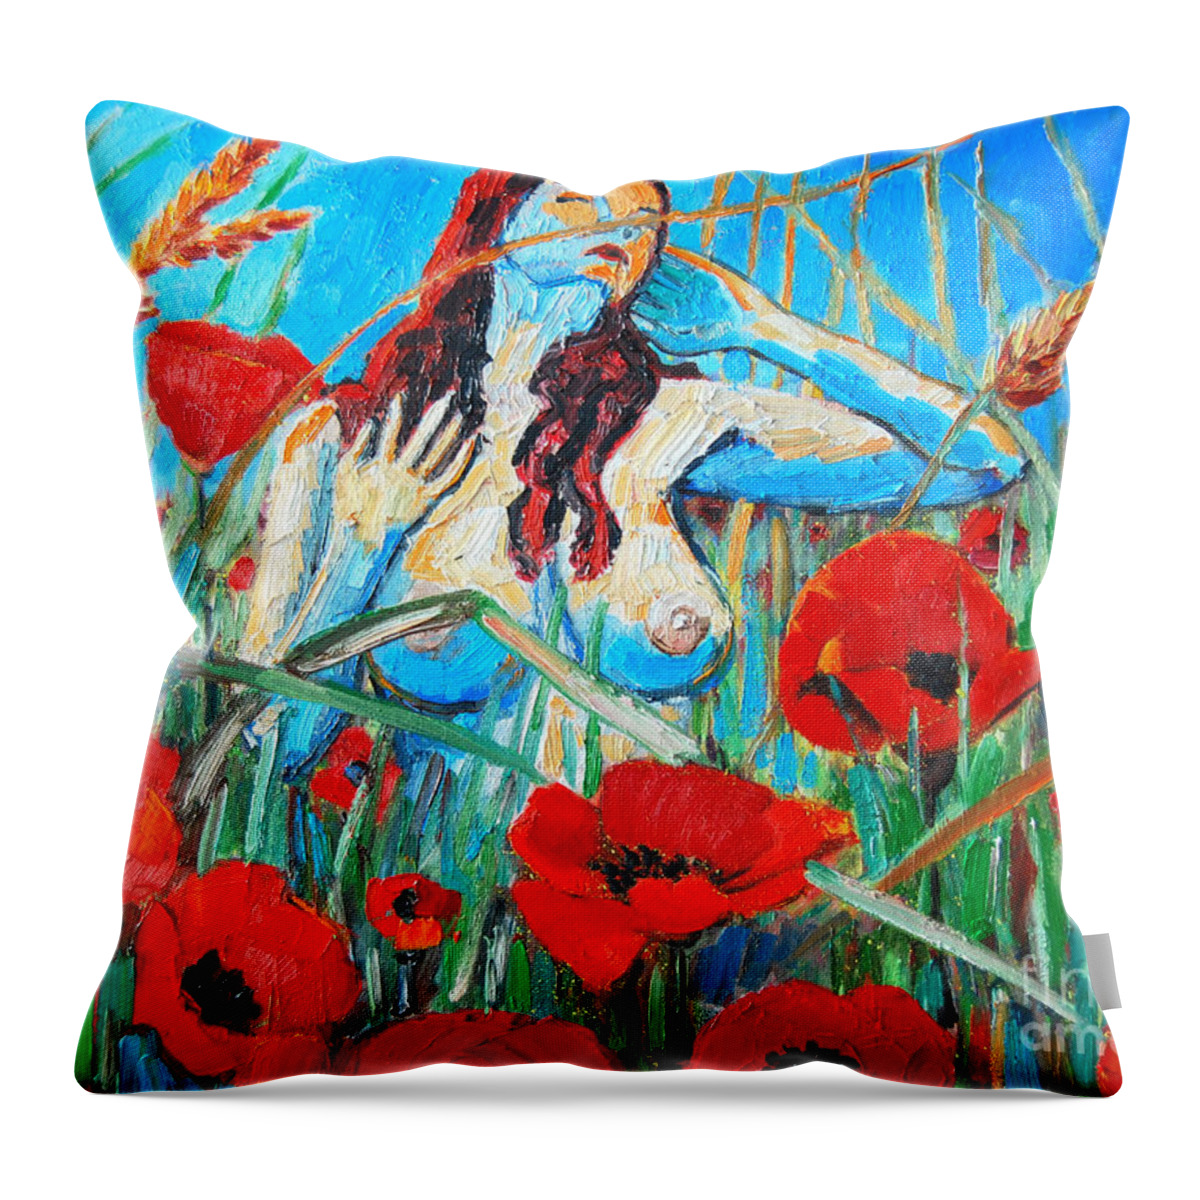  Throw Pillow featuring the painting Summer Dream 1 by Ana Maria Edulescu